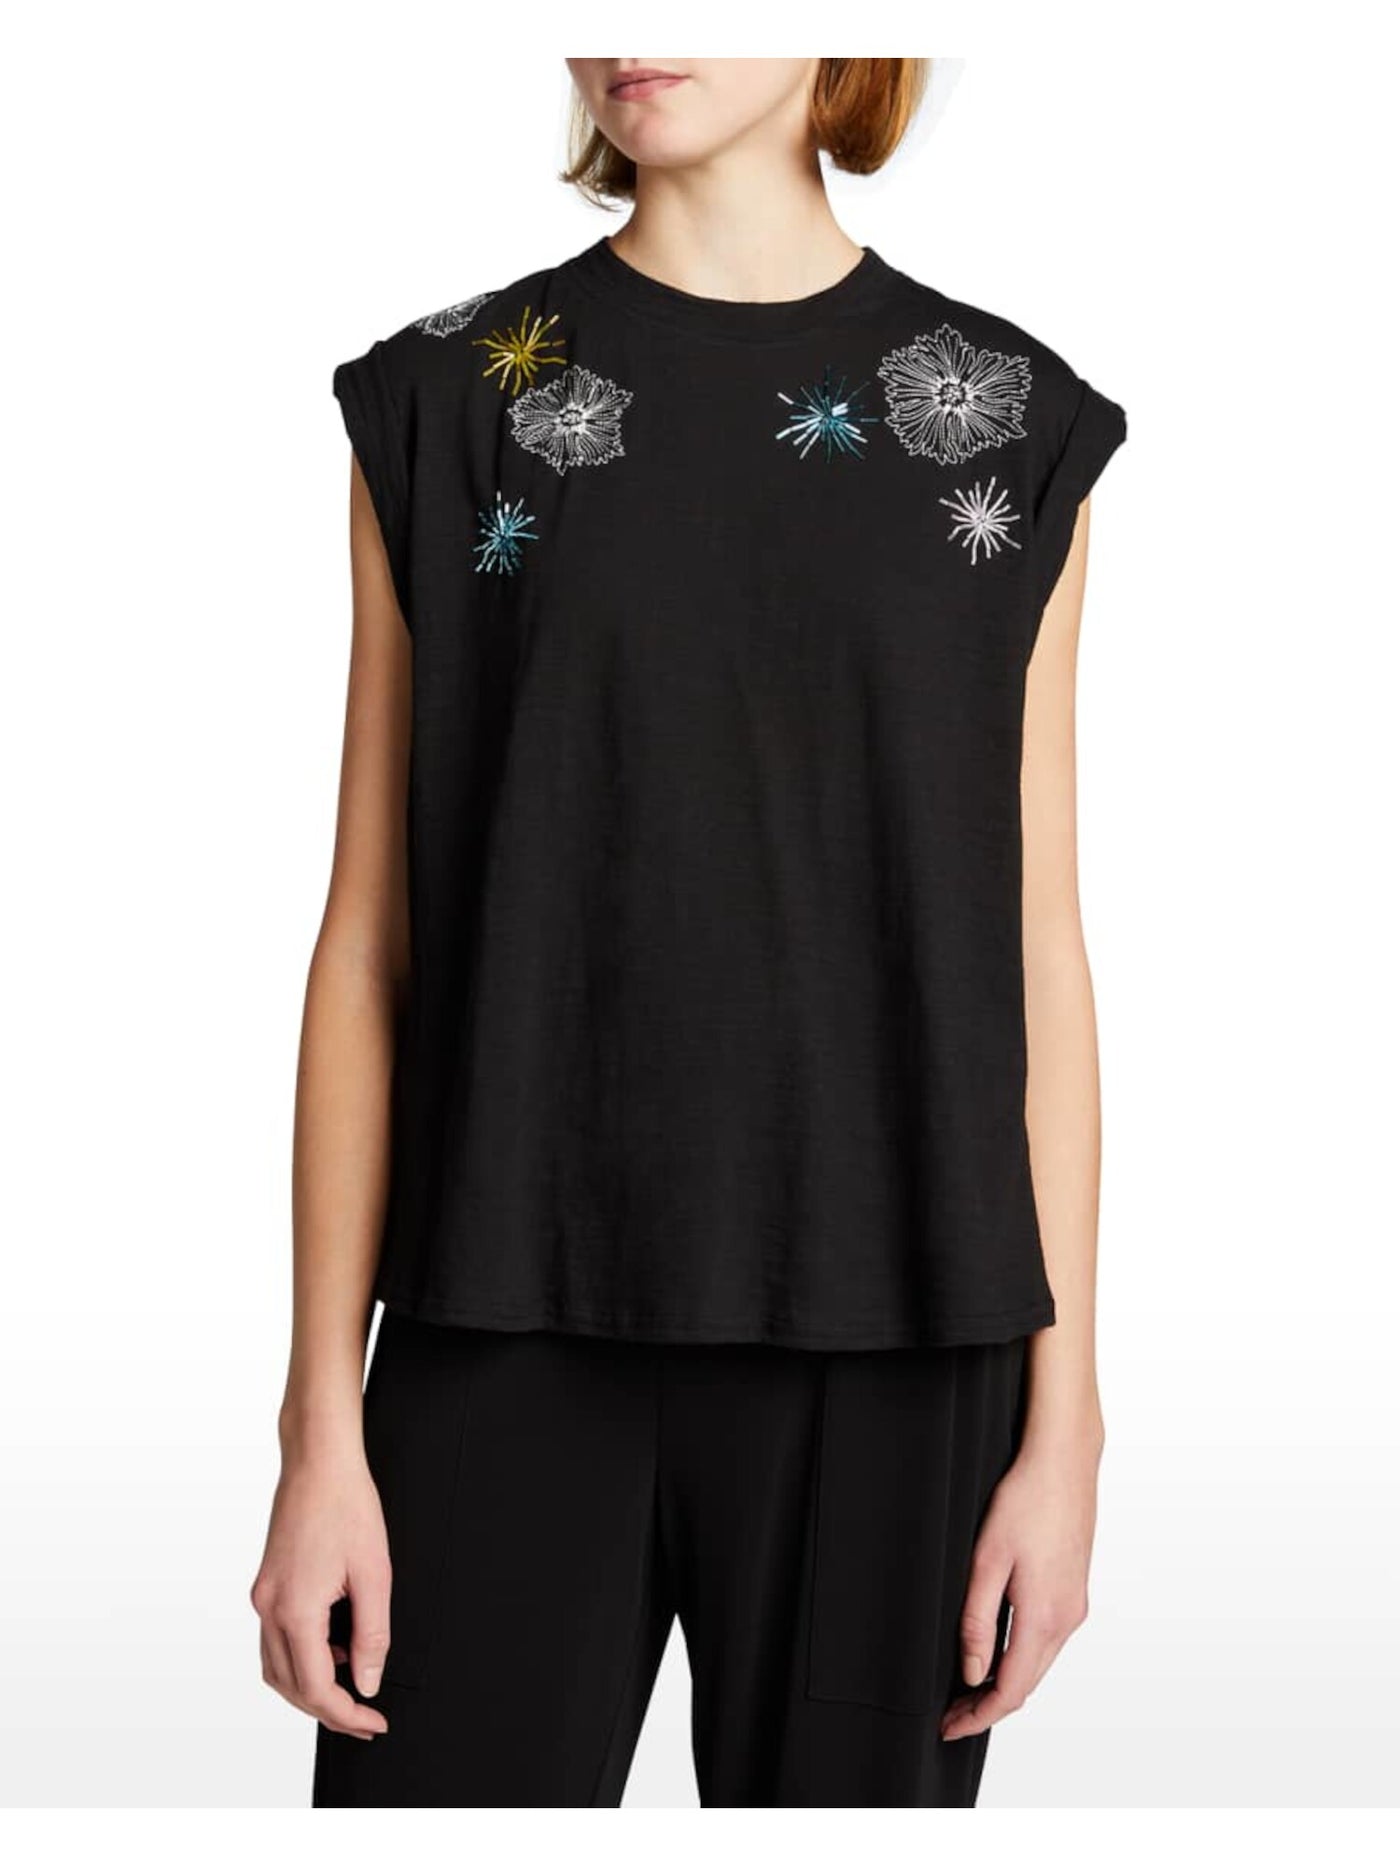 CINQ A SEPT Womens Black Embroidered Floral Sleeveless Crew Neck T-Shirt XS